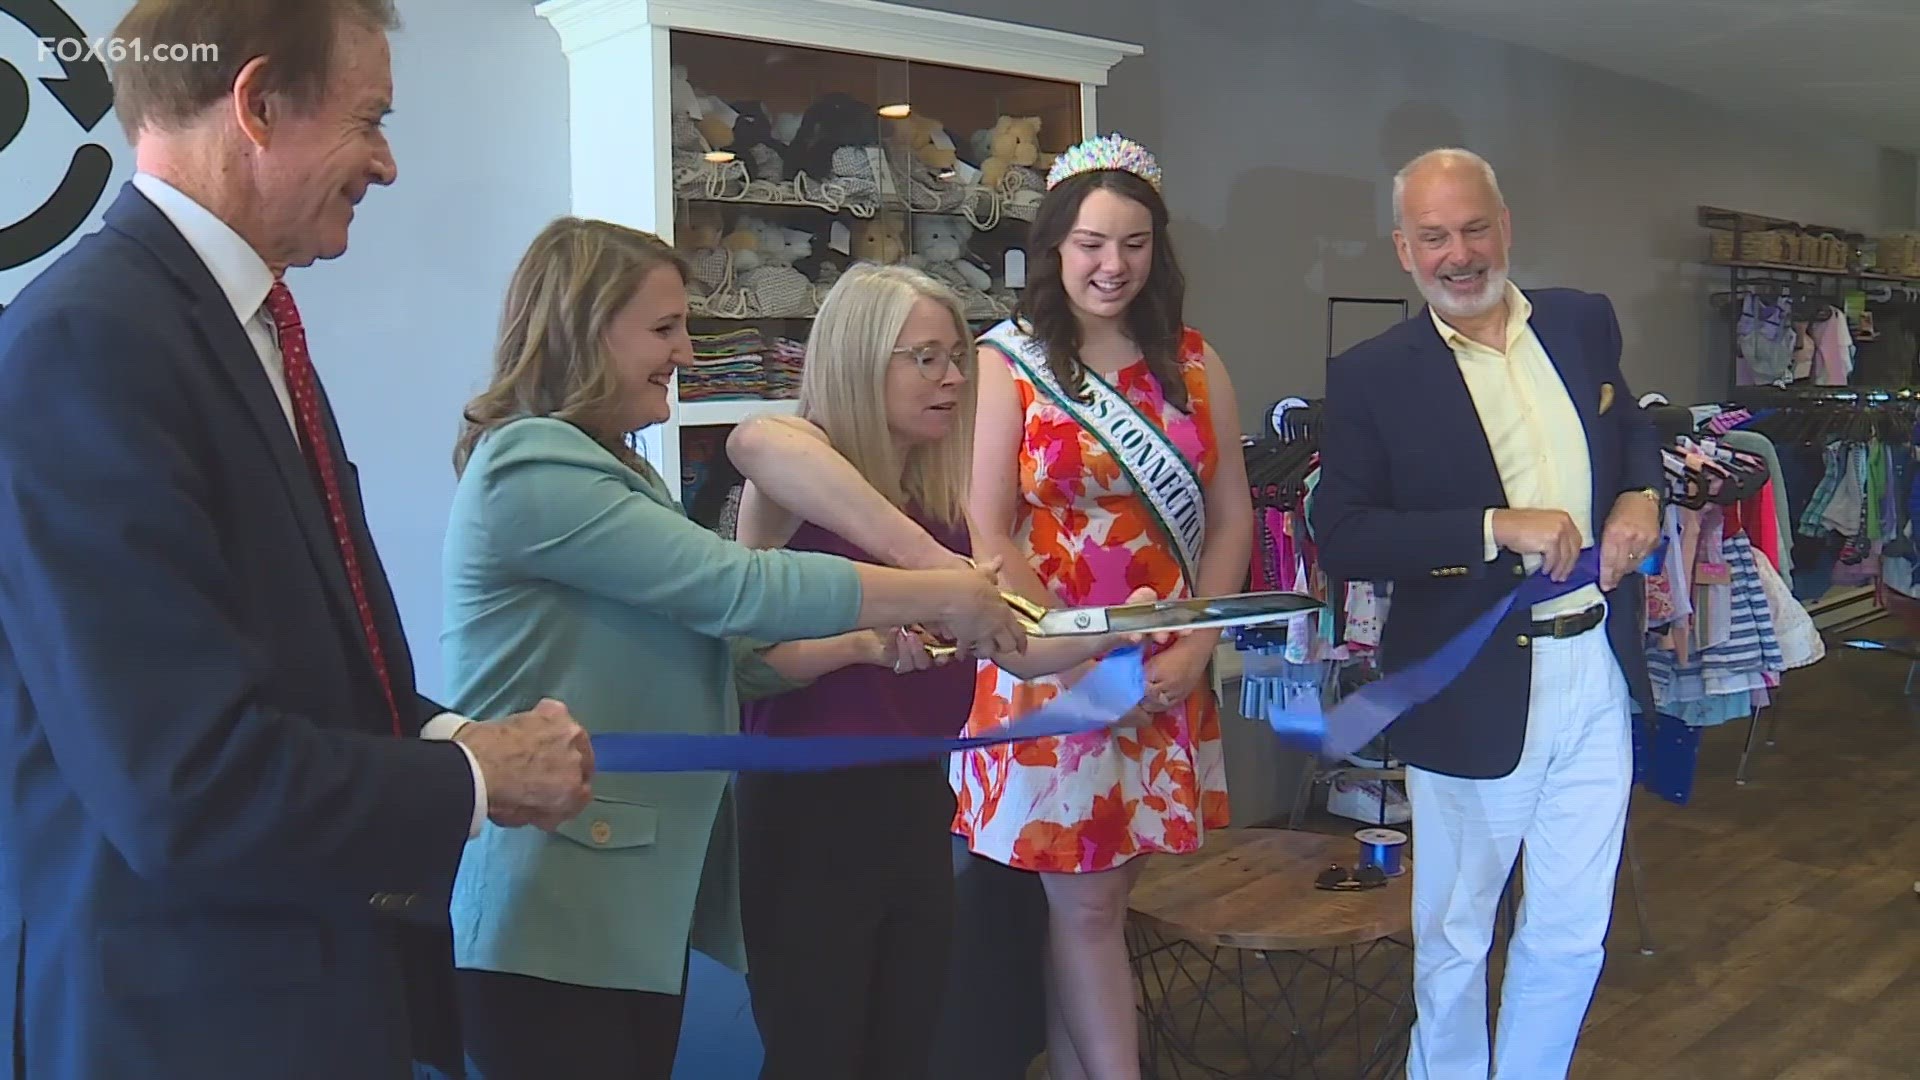 The new boutique is tailor-made just for foster families and offers donated clothing, shoes, backpacks, and toys for foster children to take.